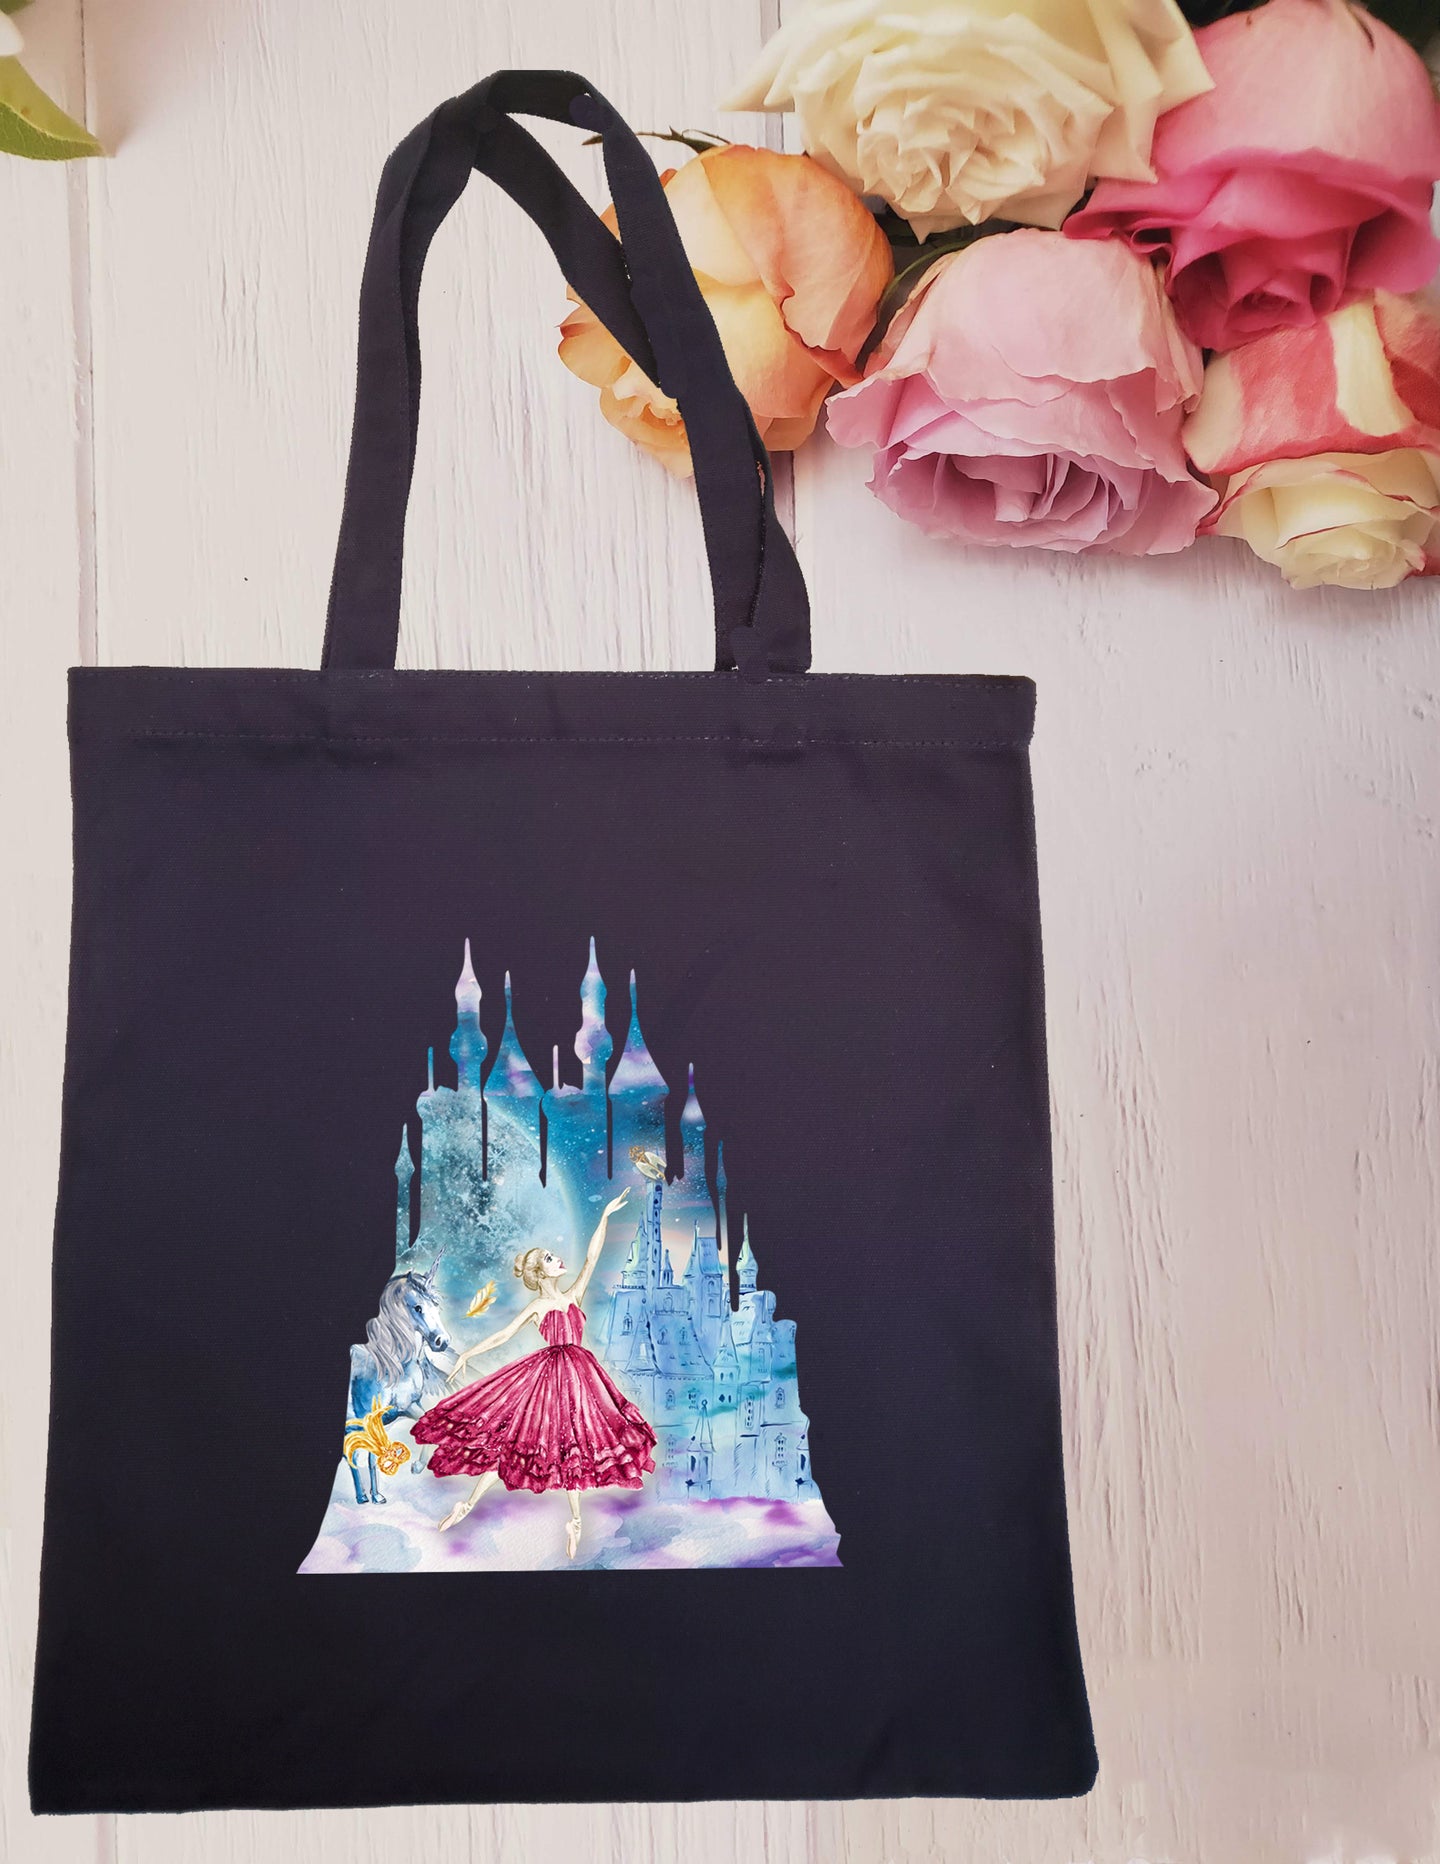 Ballet - Dance in the Clouds - Tote Bag